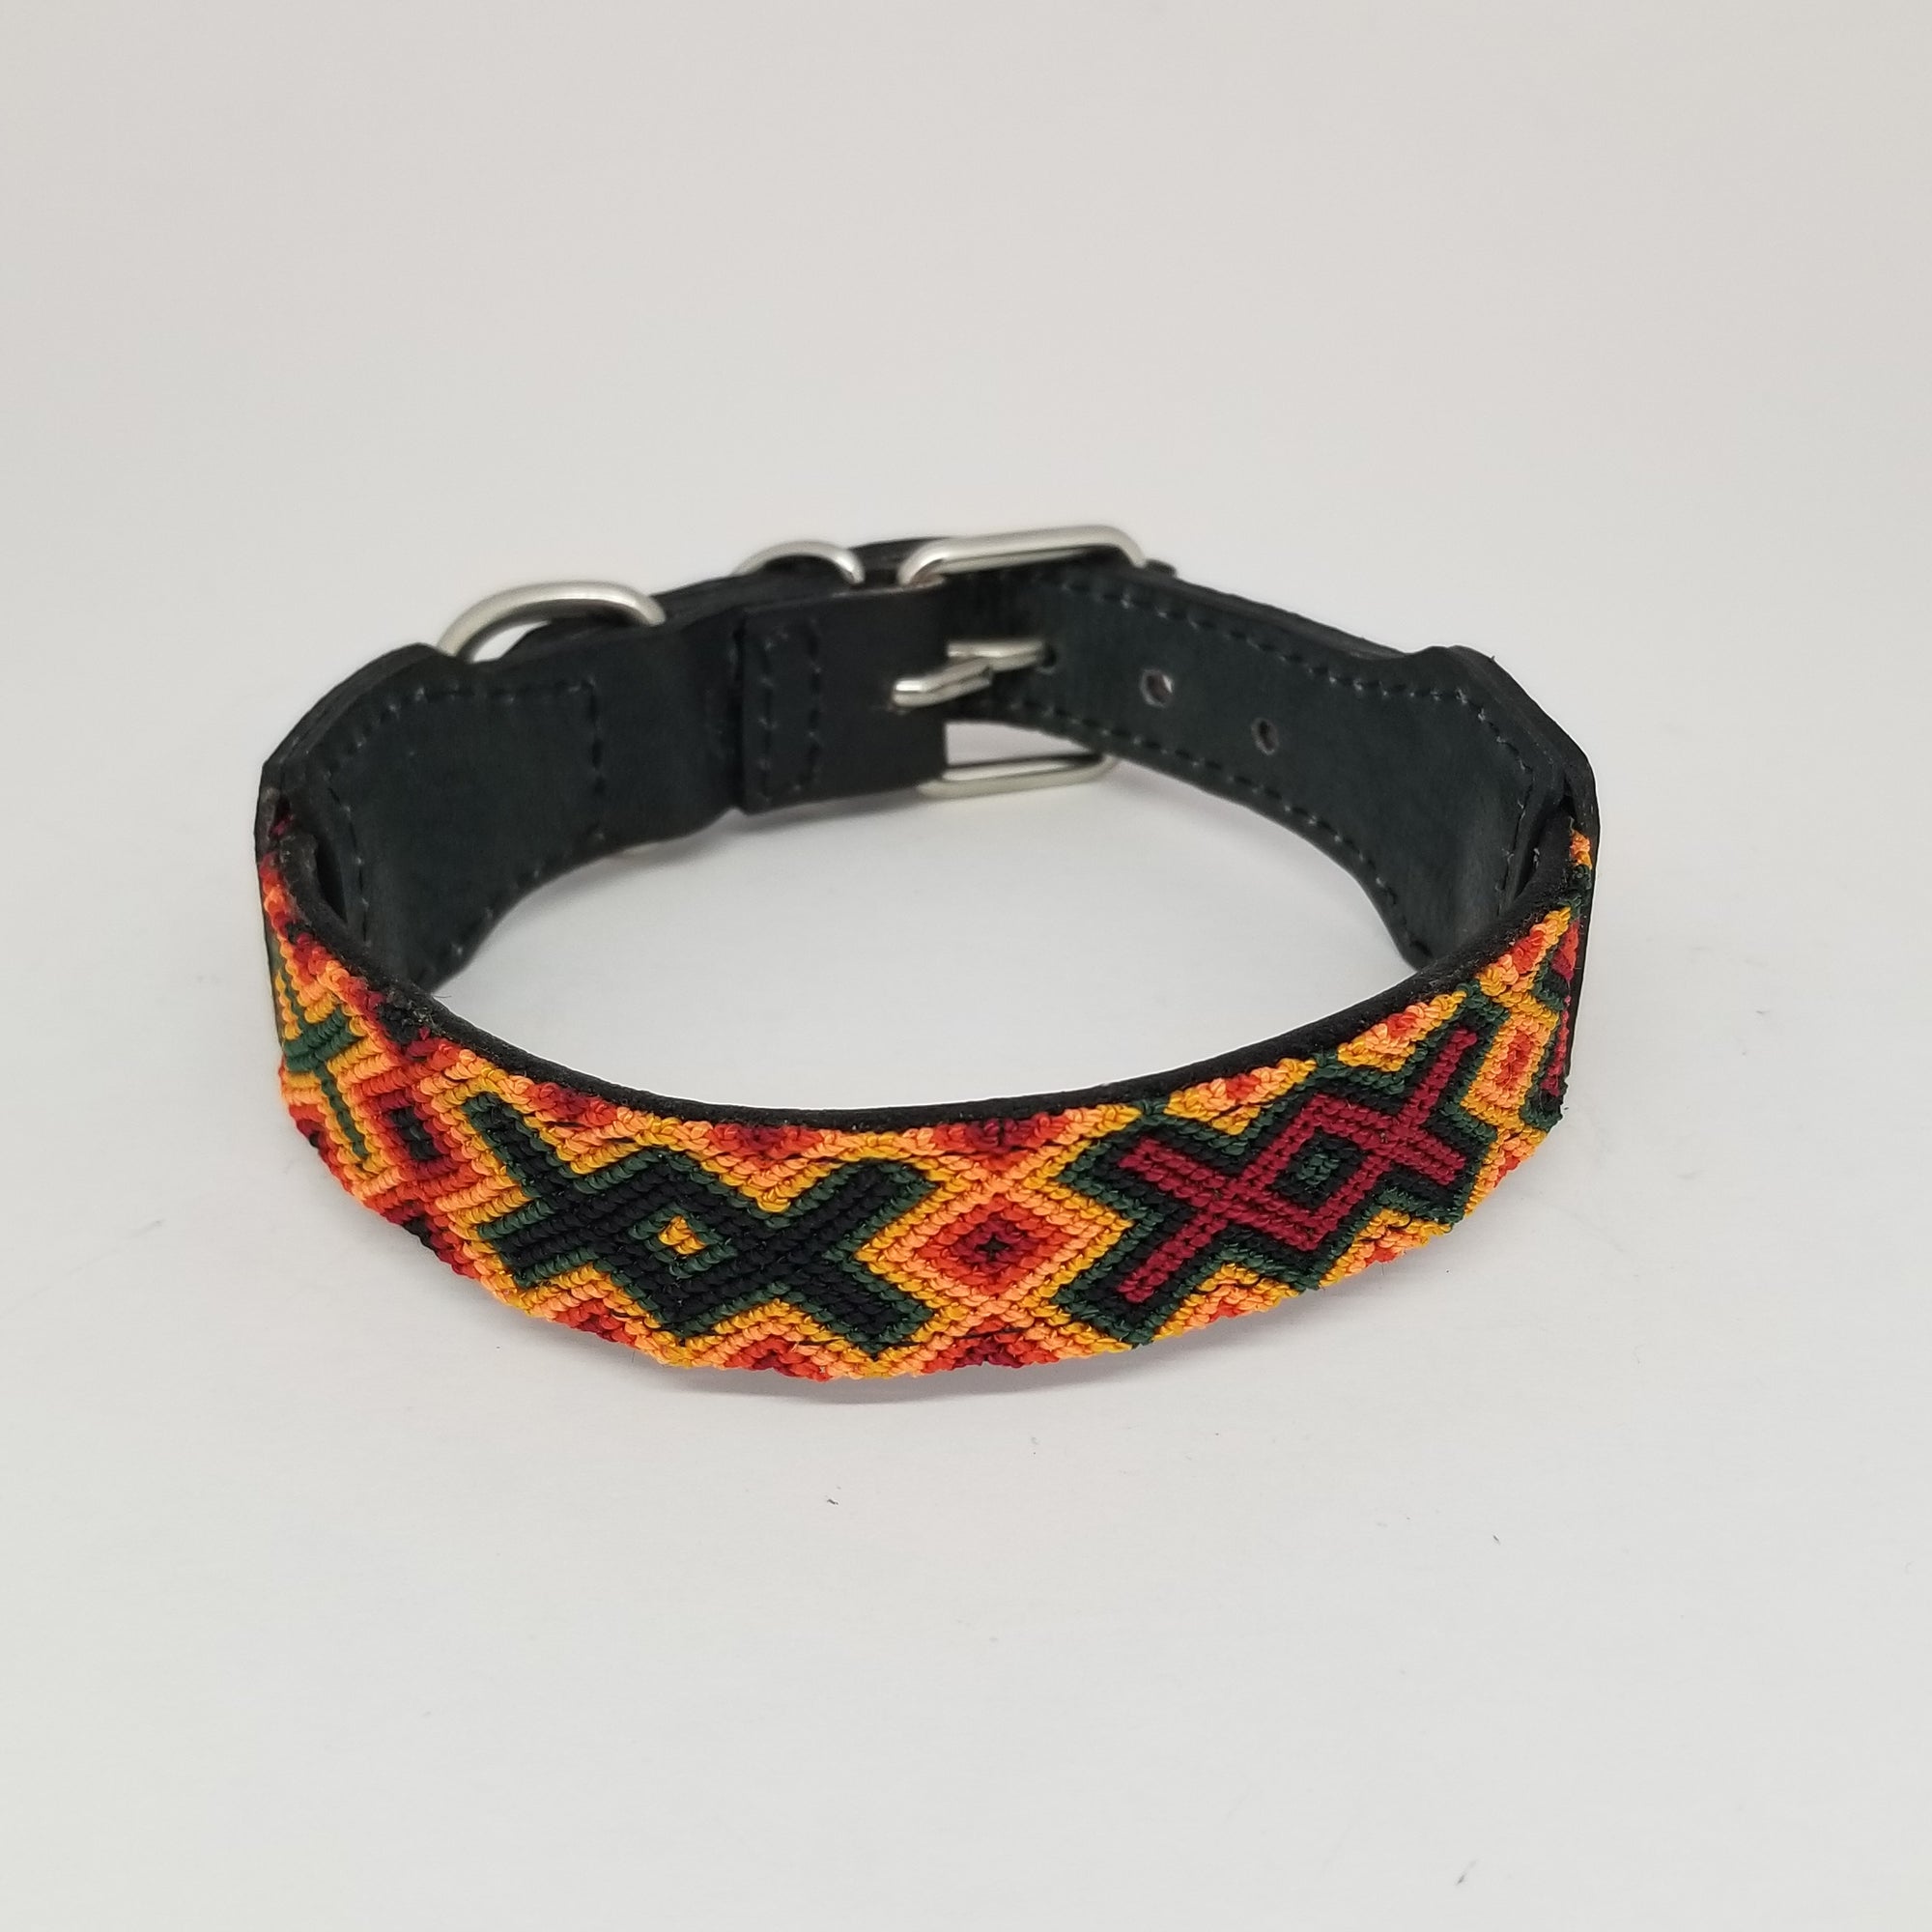 SMALL DOG COLLAR FROM CHIAPAS. C4340